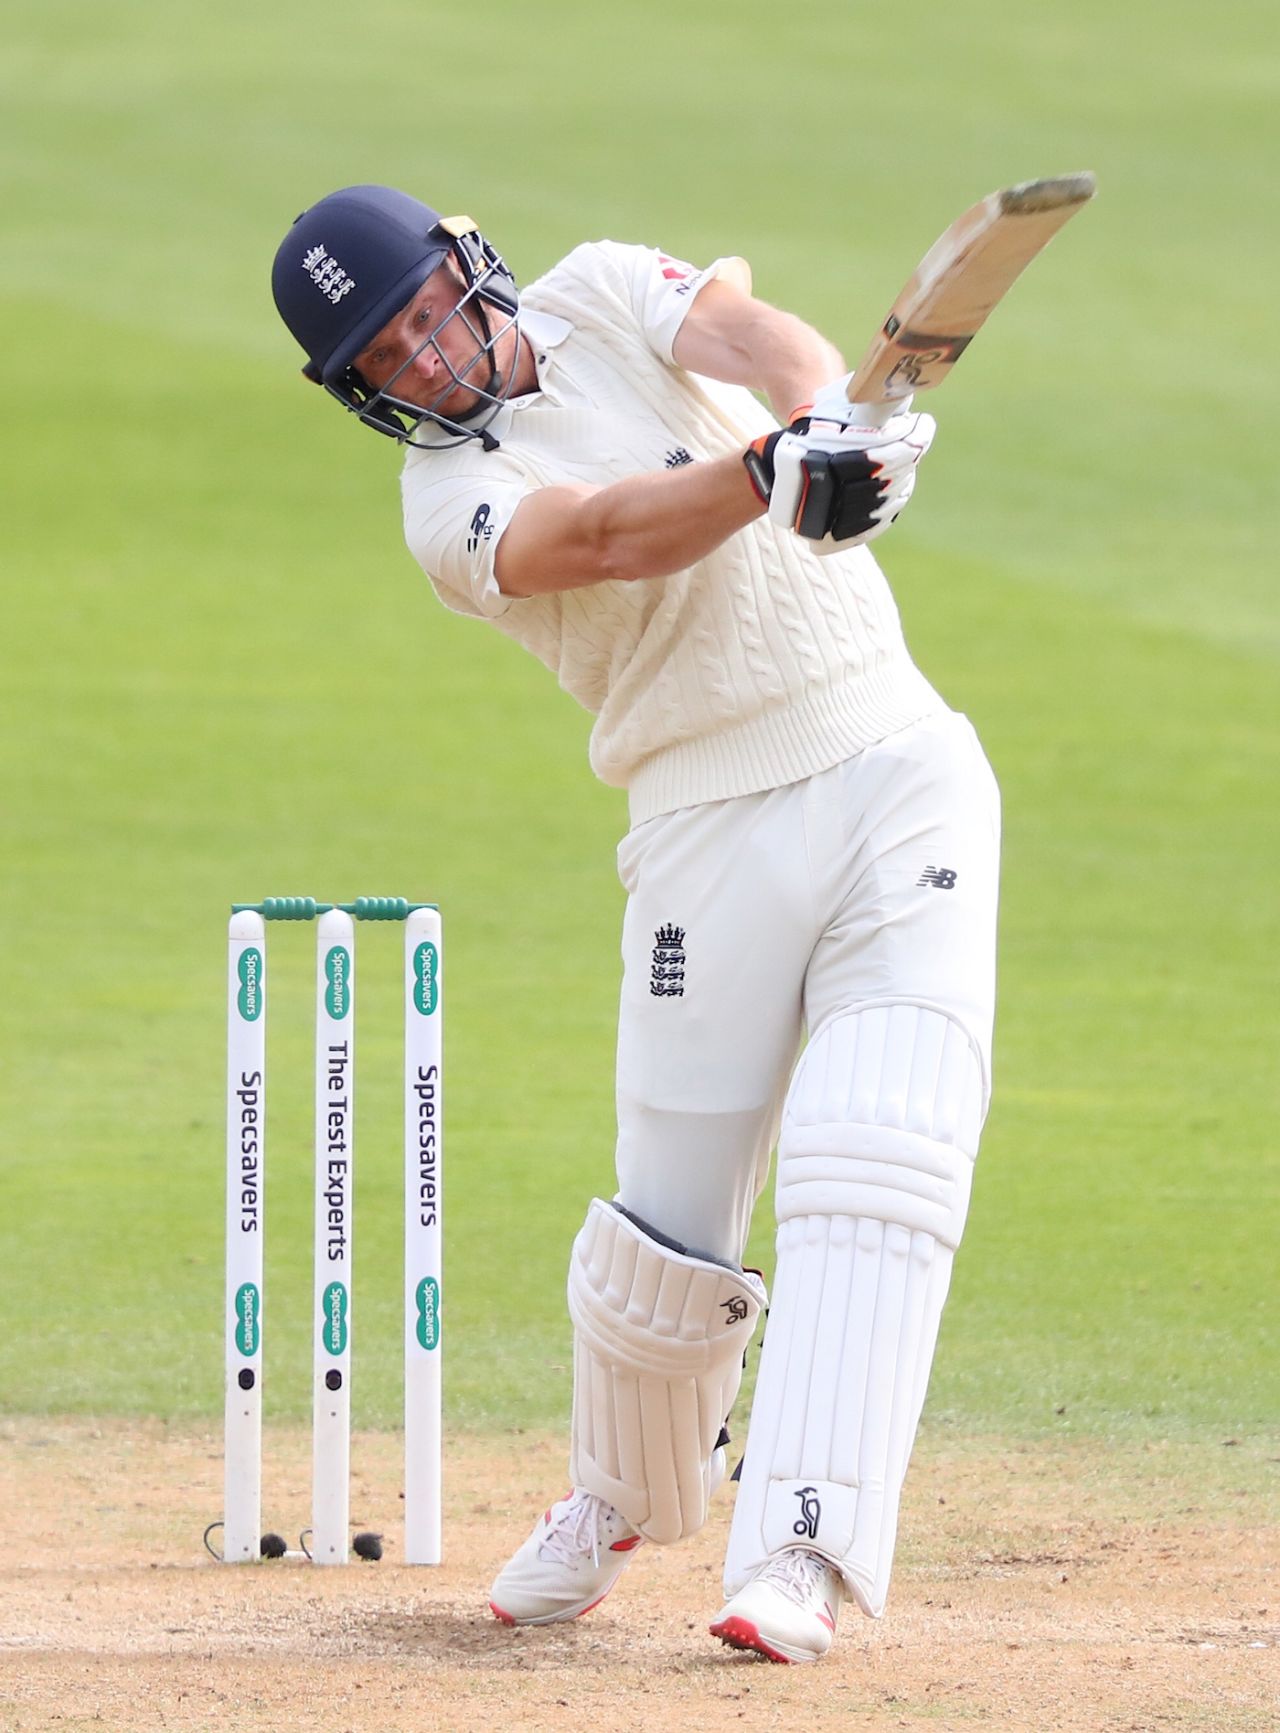 Jos Buttler plays an attacking shot, England v India, 5th Test, The Oval, 2nd day, September 8, 2018